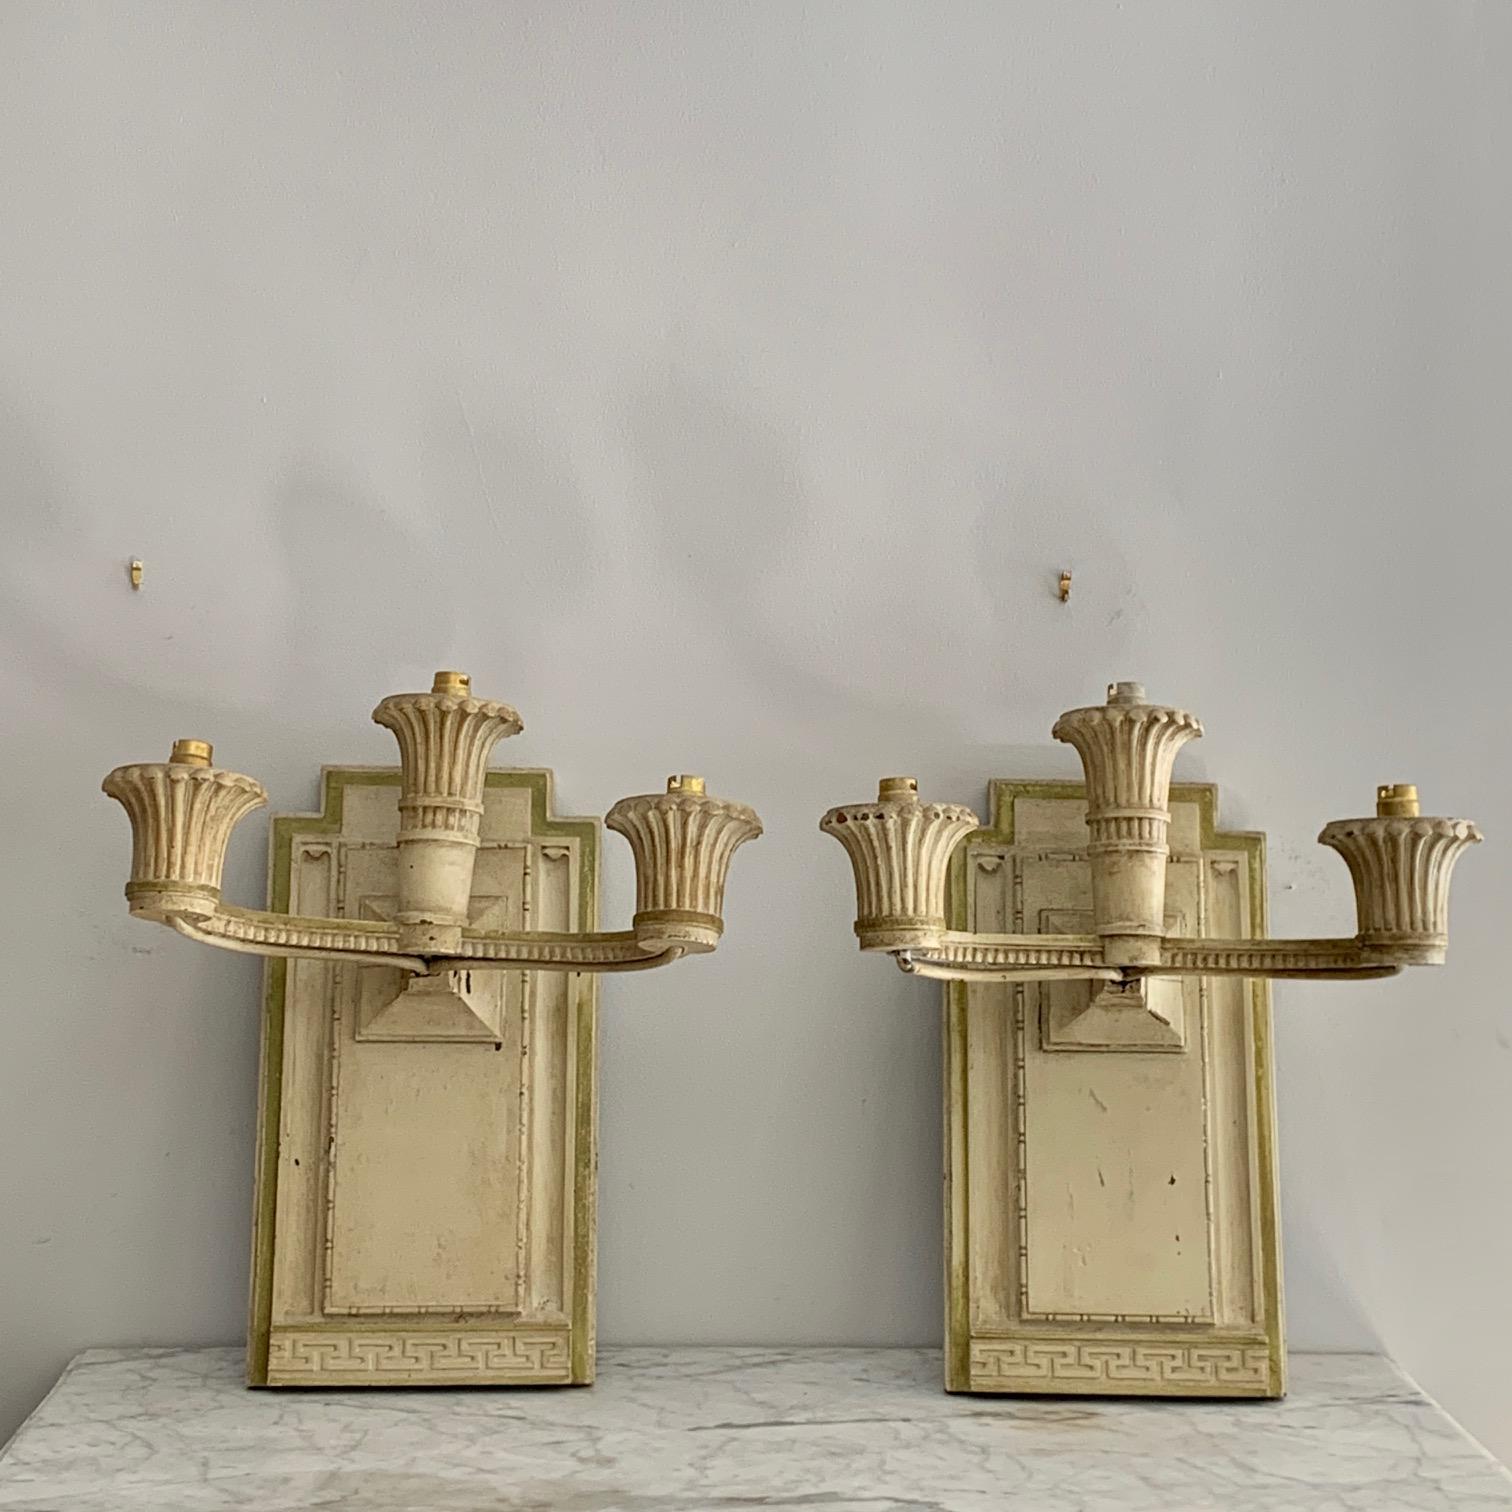 Pair of wall sconces in carved wood and painted in gray with three lights each, in a neoclassical style.